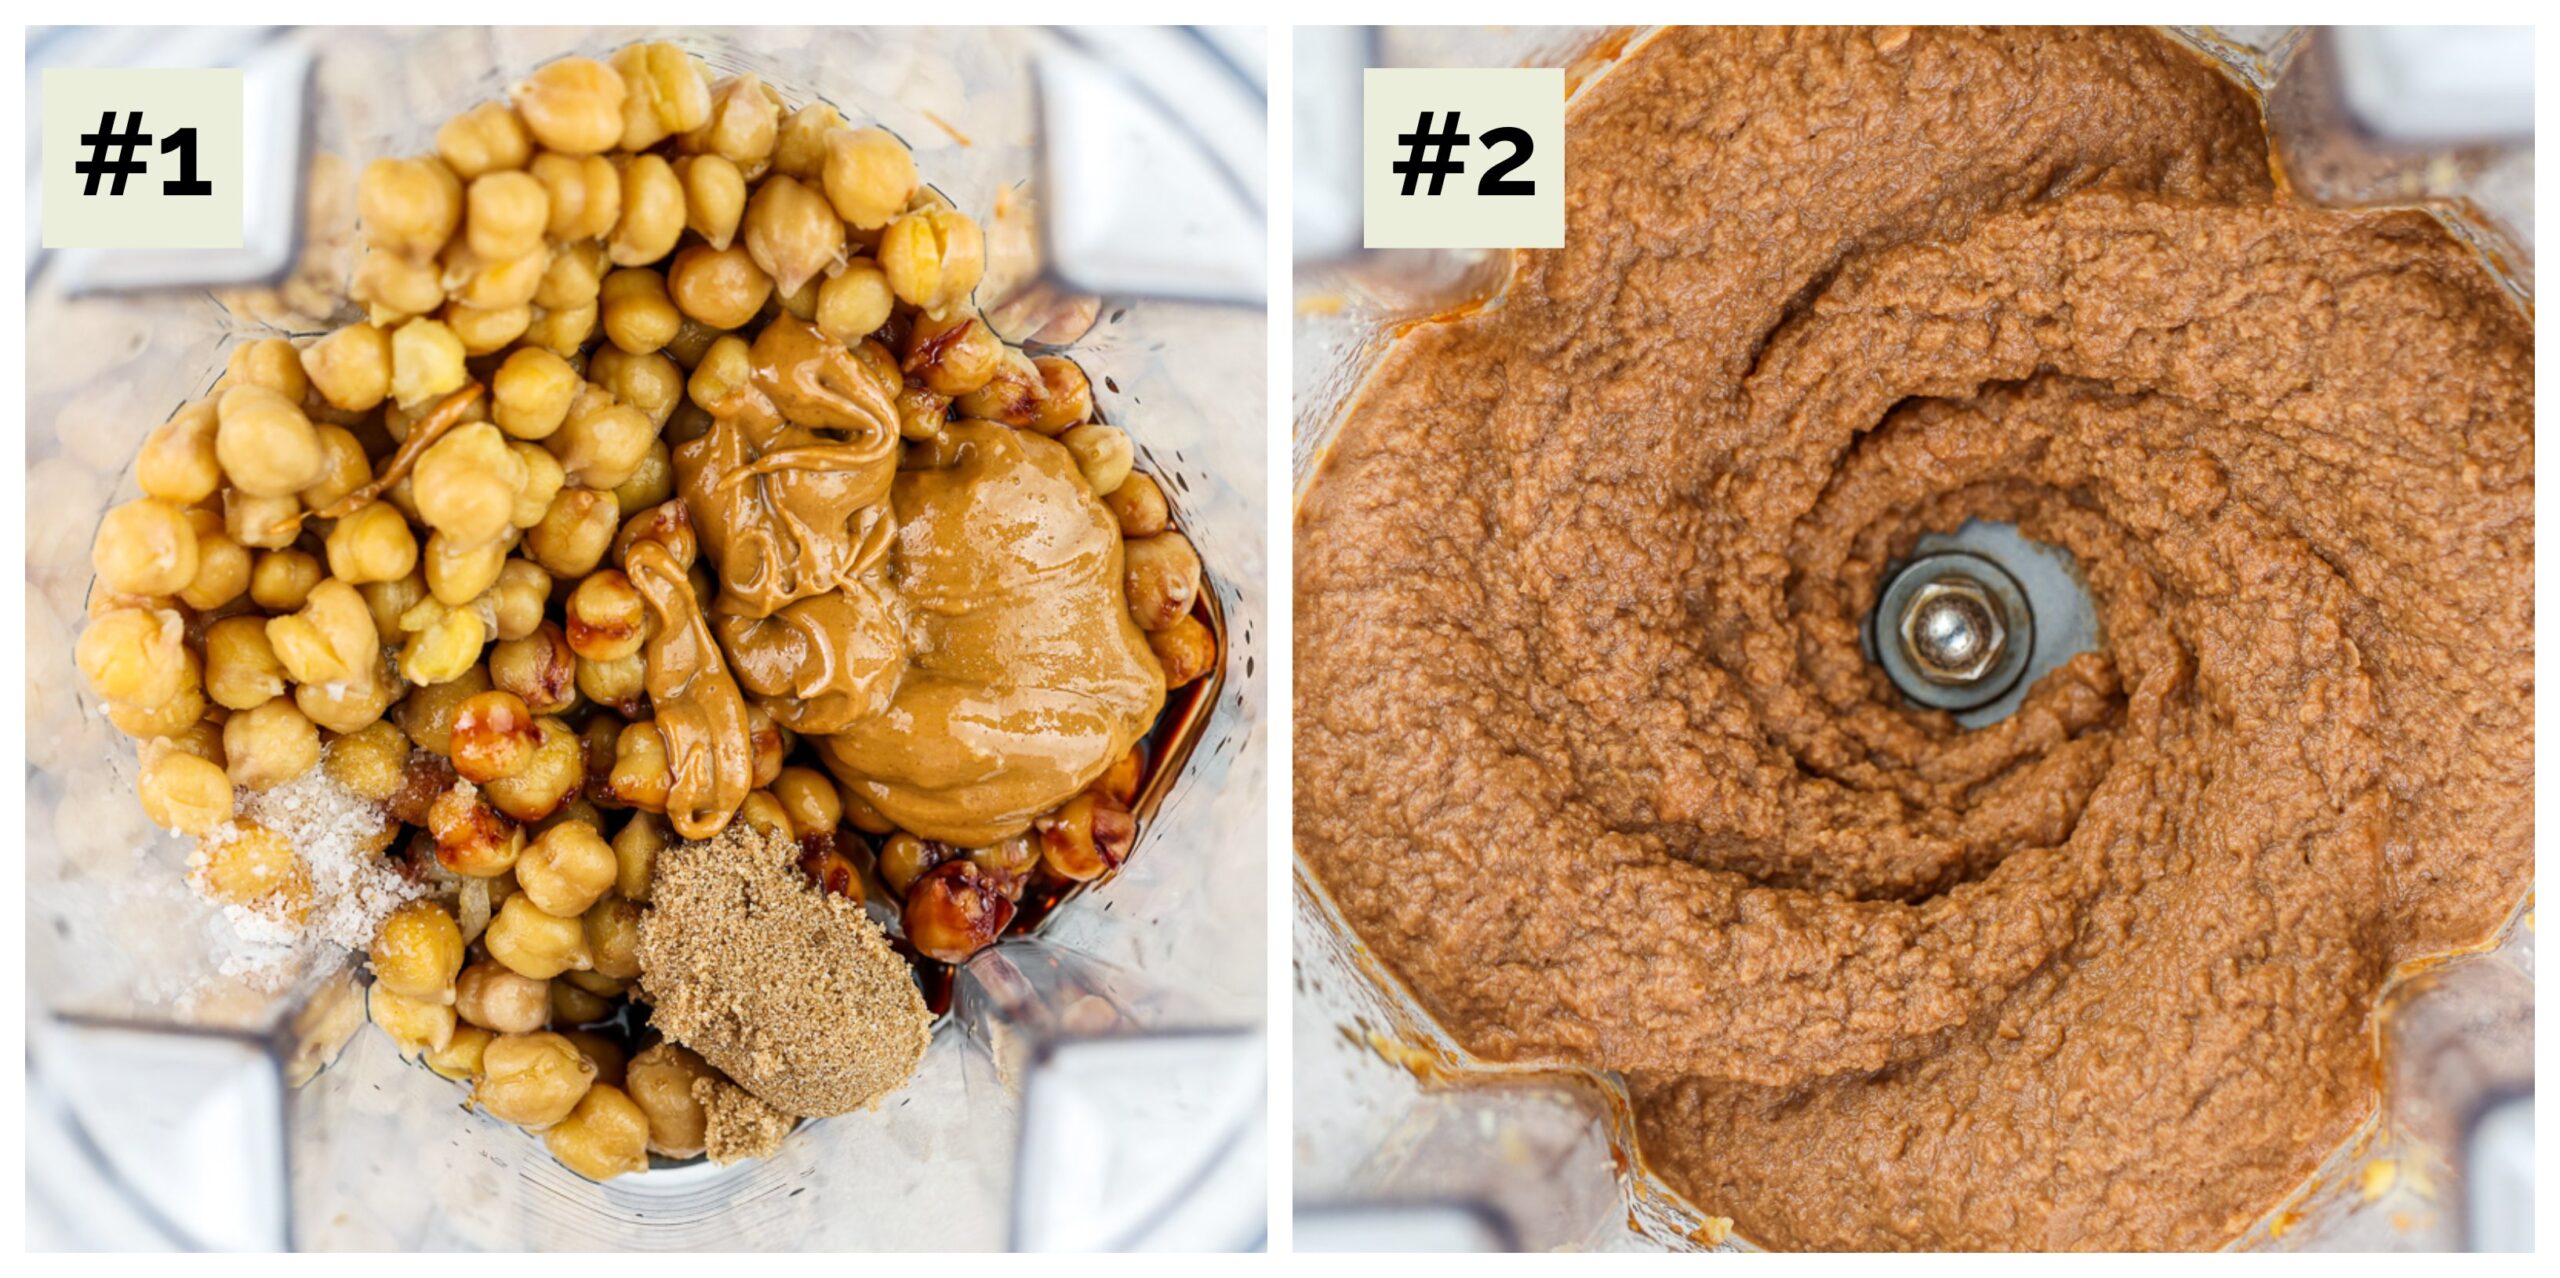 Two image collage with process shots to make chickpea cookie dough. Image 1 is a blender with chickpeas, nut butter, and date syrup, image 2 is the pureed ingredients together in the blender. It is a medium brown color. 